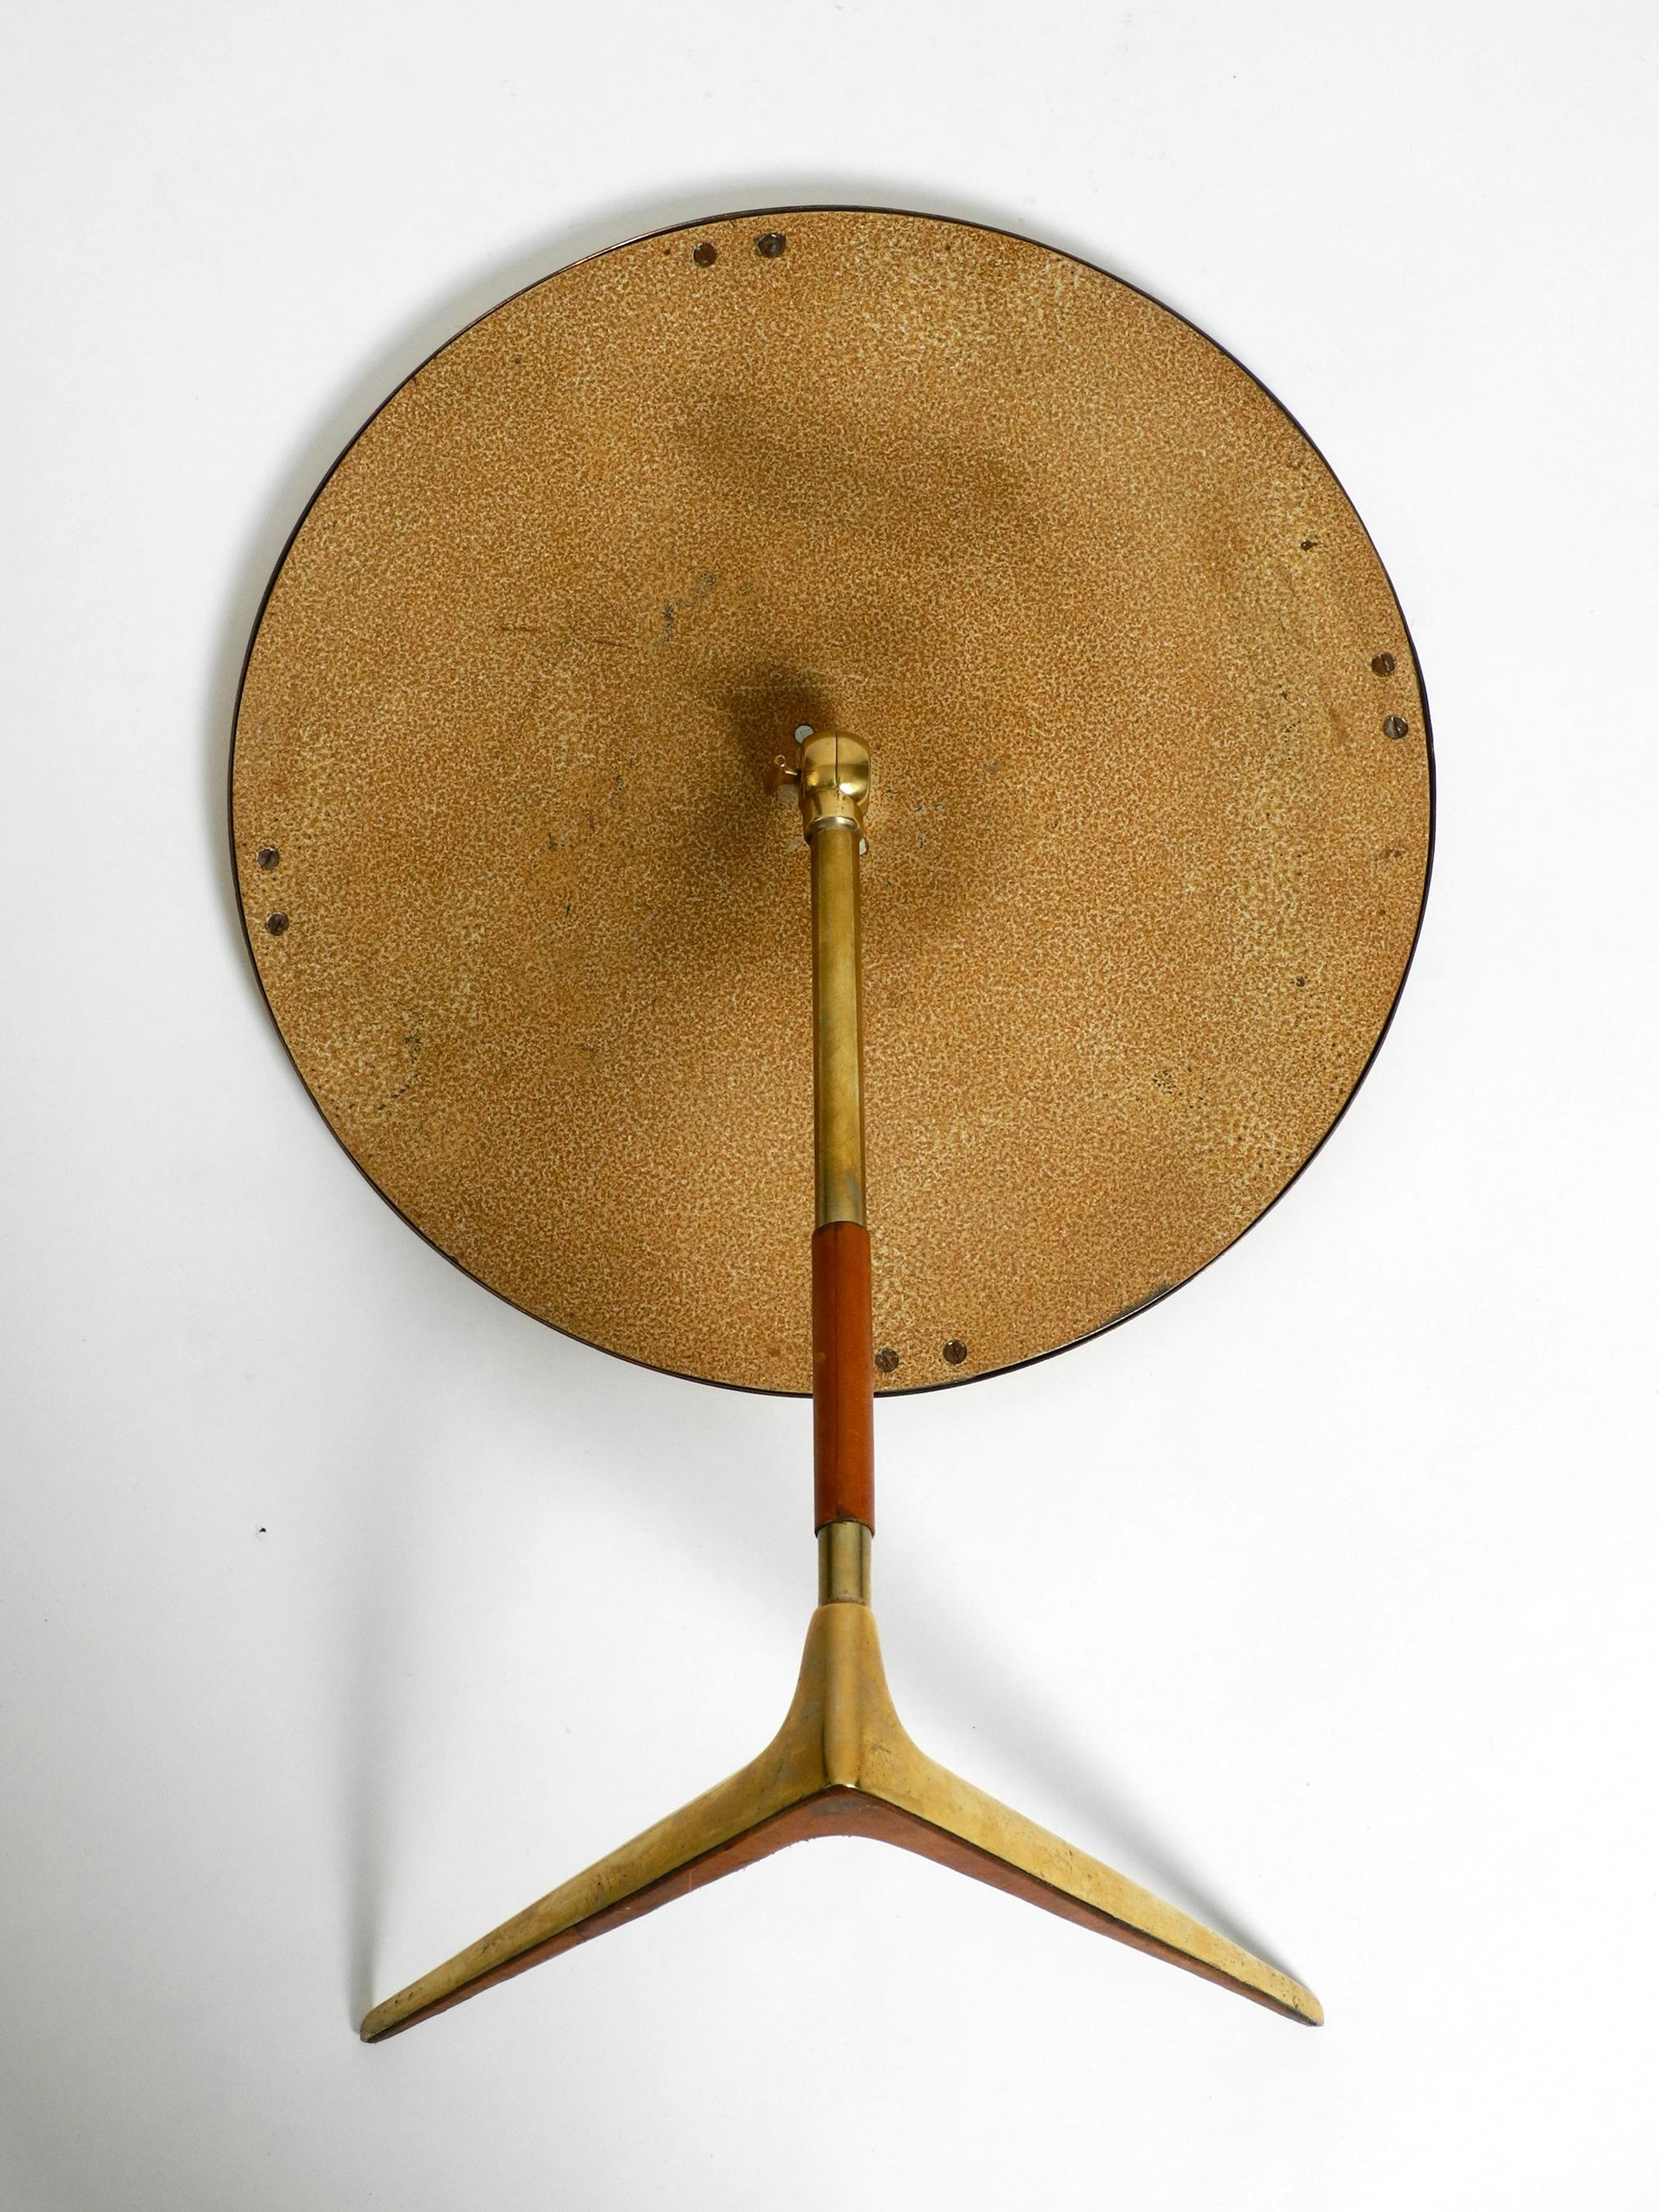 Large Italian Midcentury Crow's Foot Table Mirror Made of Brass and Leather 6